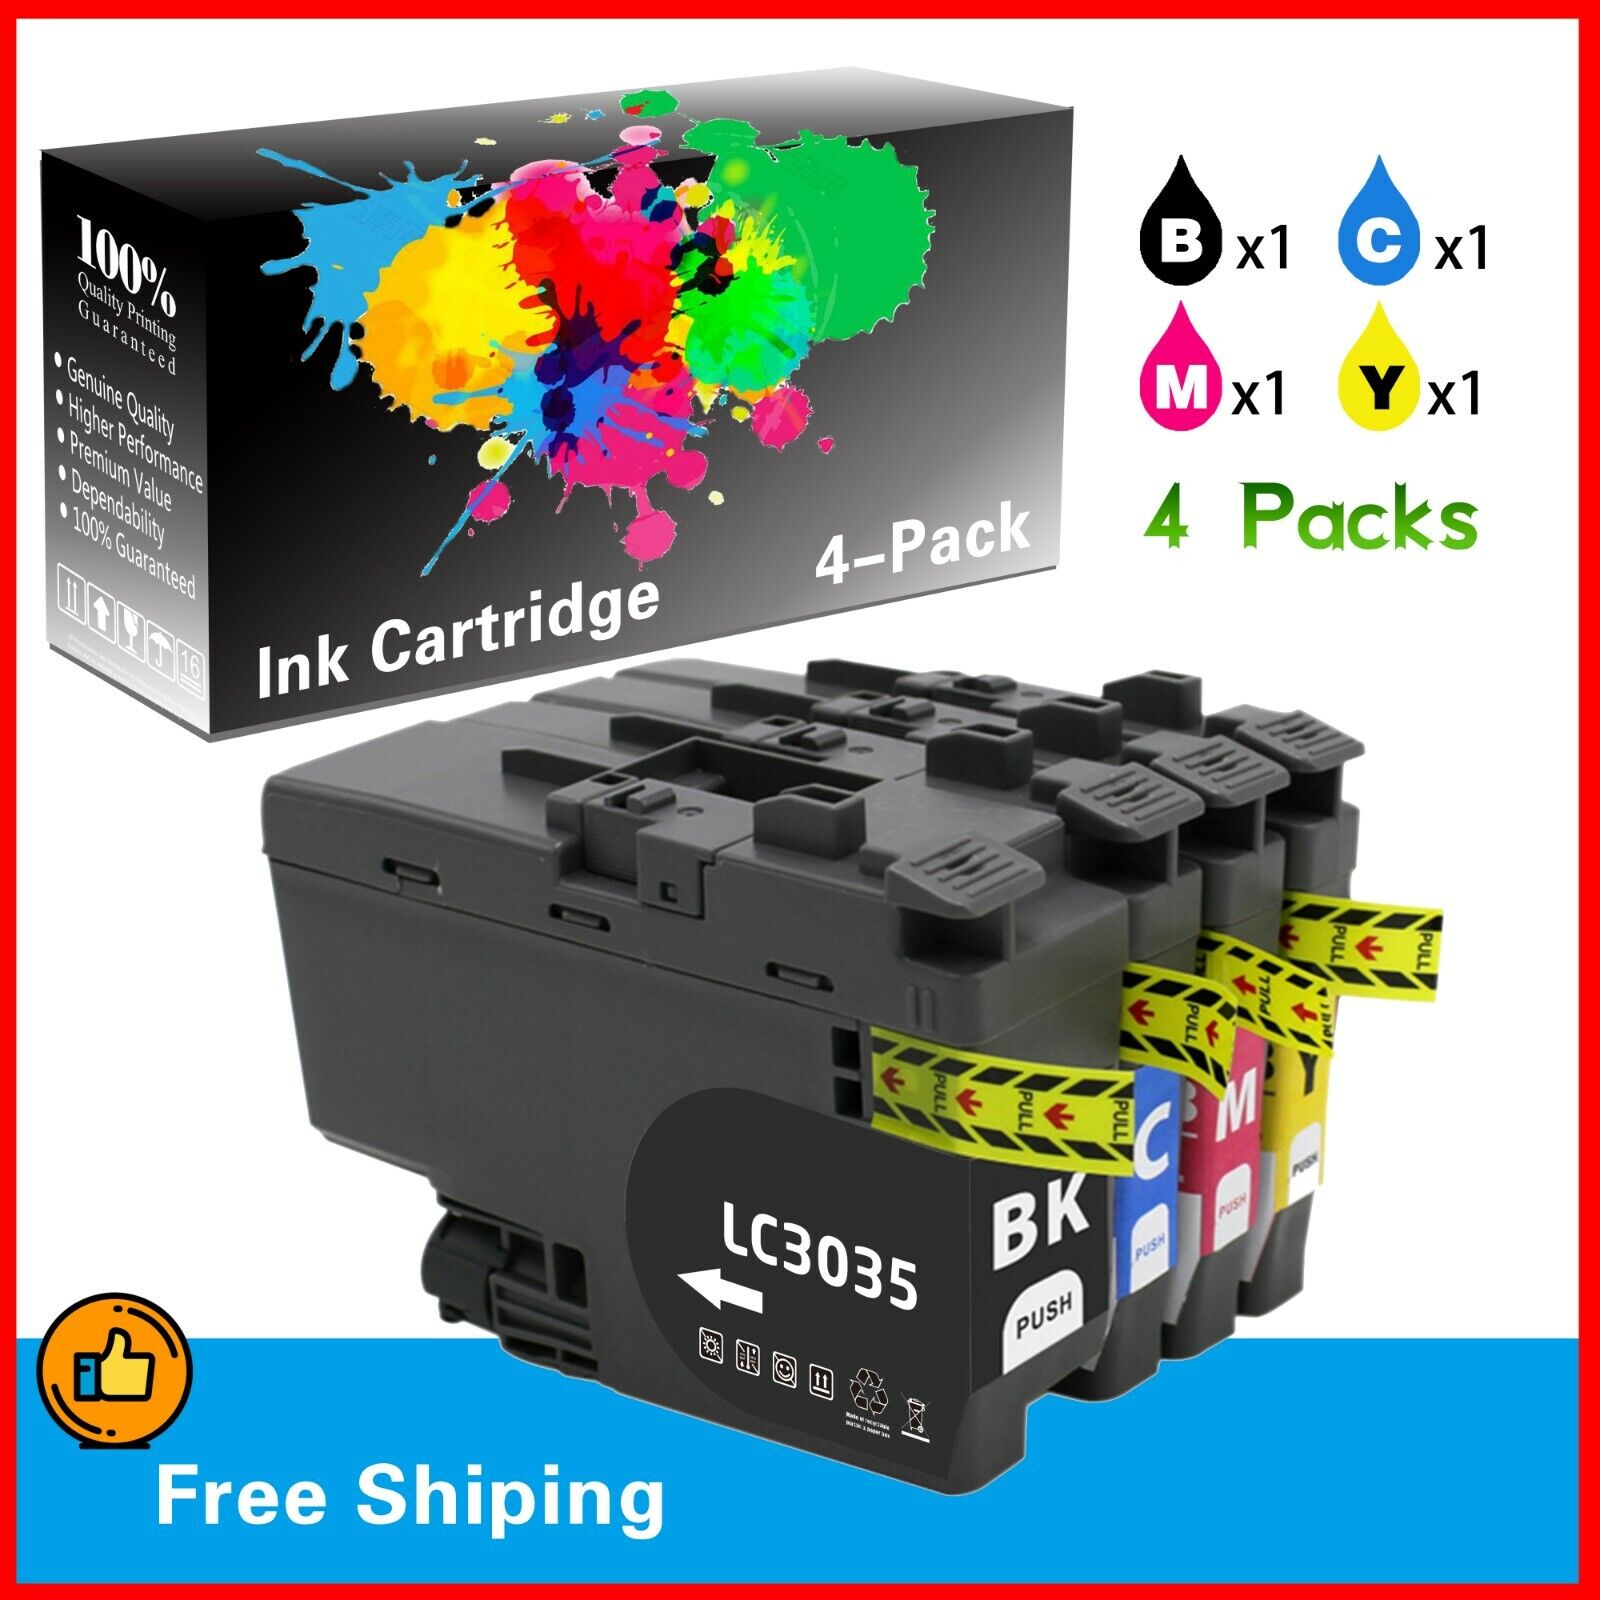 4 PACK Color LC3035 LC3035XXL Ink Cartridge for MFC-J815DW MFC-J995DW XL